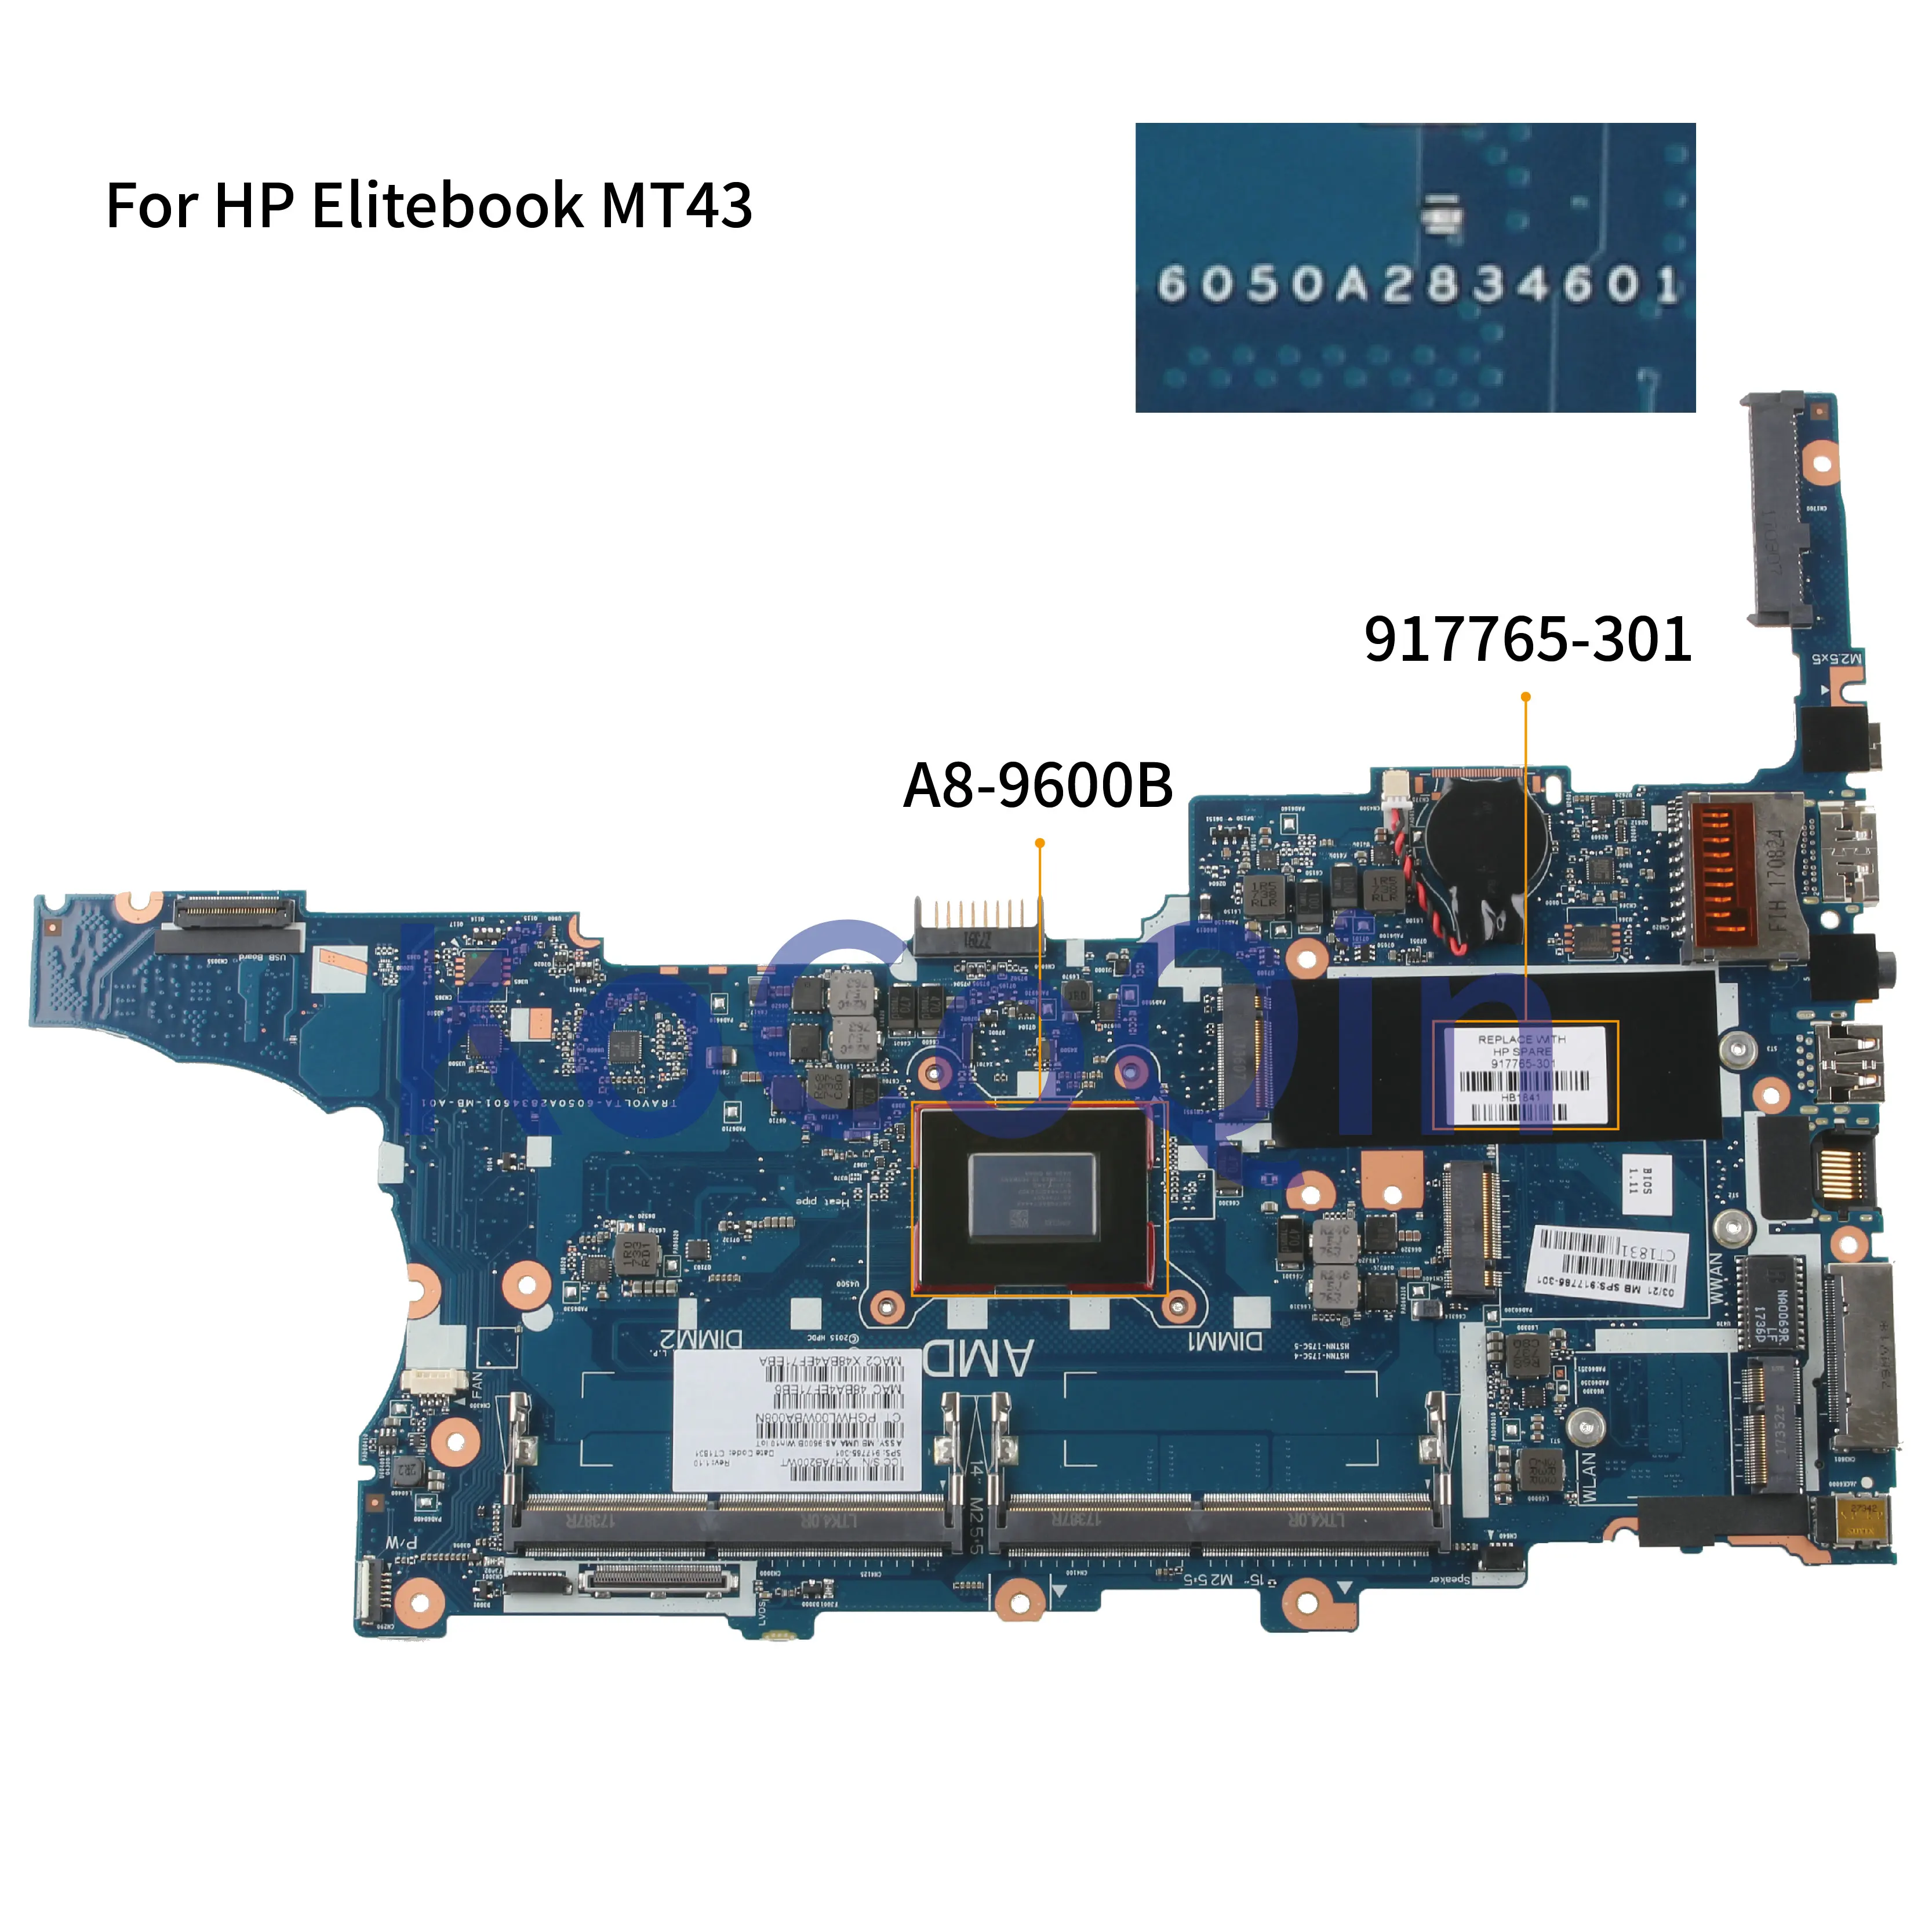 Great Value  KoCoQin Laptop motherboard For HP Elitebook 745 G4 MT43 Mainboard 917765-001 917765-601 6050A283460